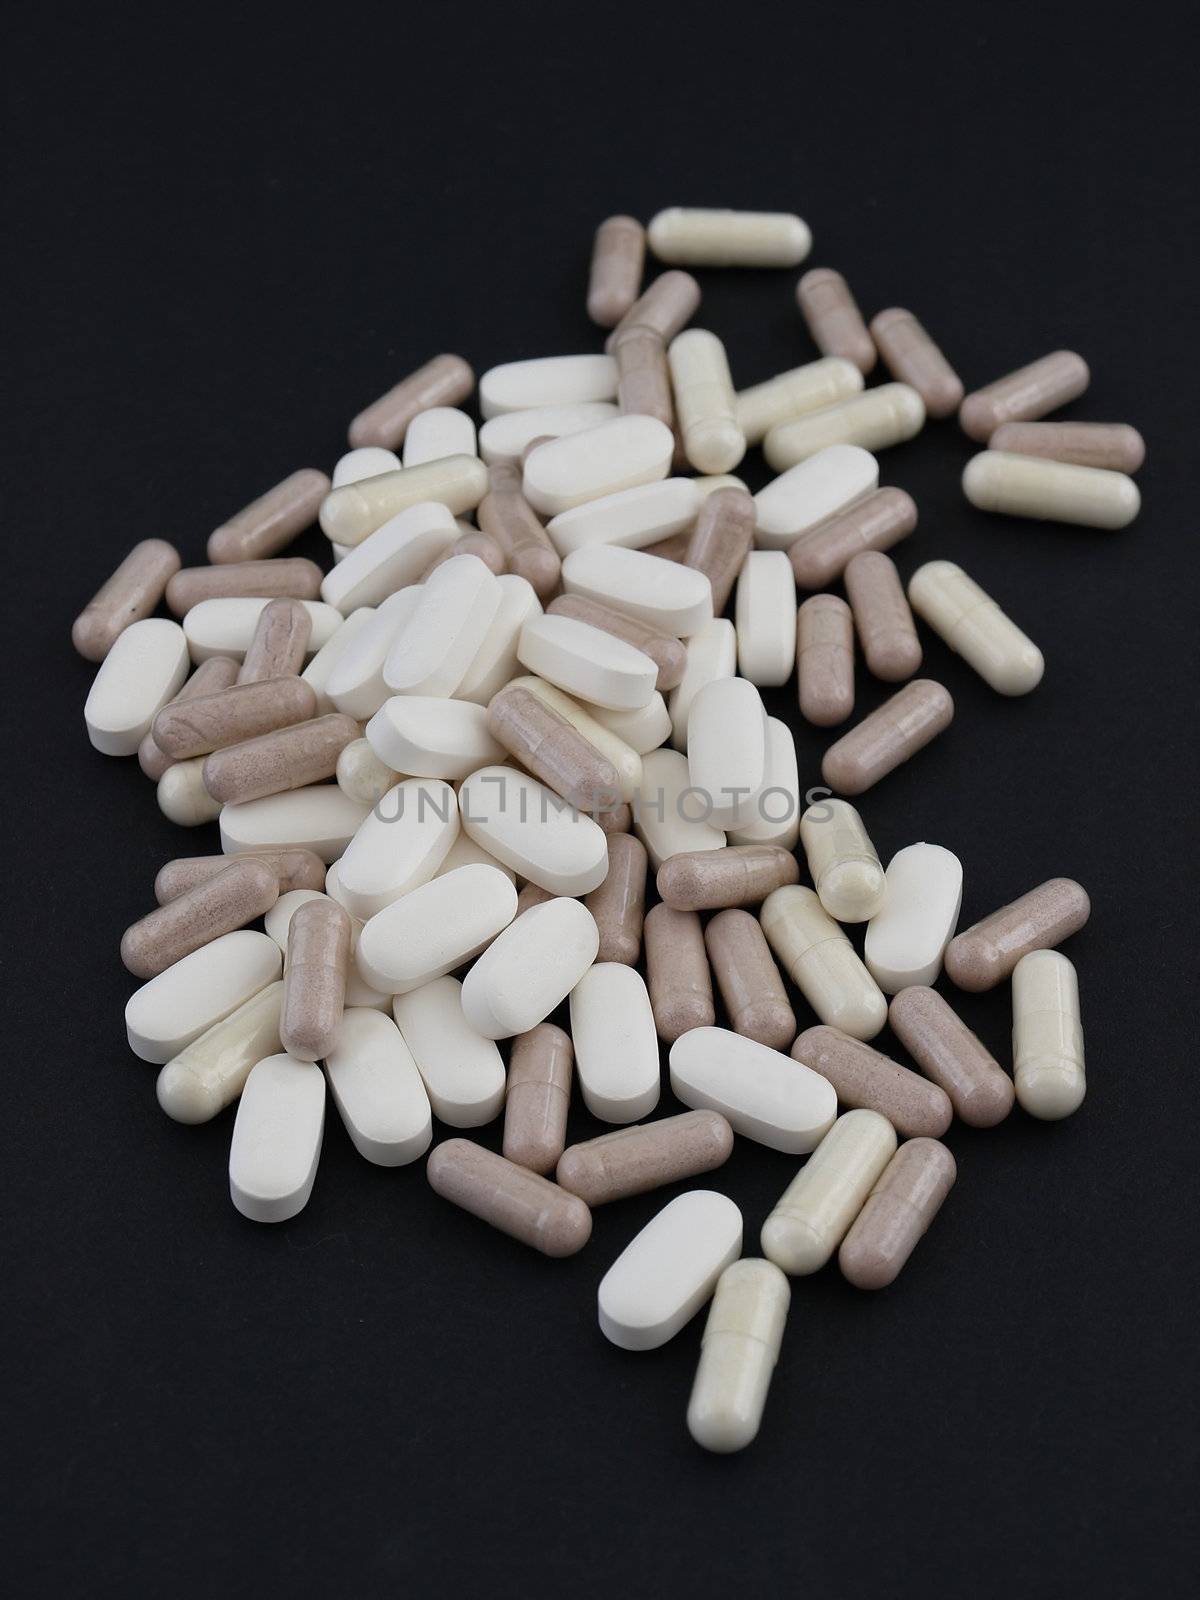 A spill of large white pills and brown capsules over a black background.